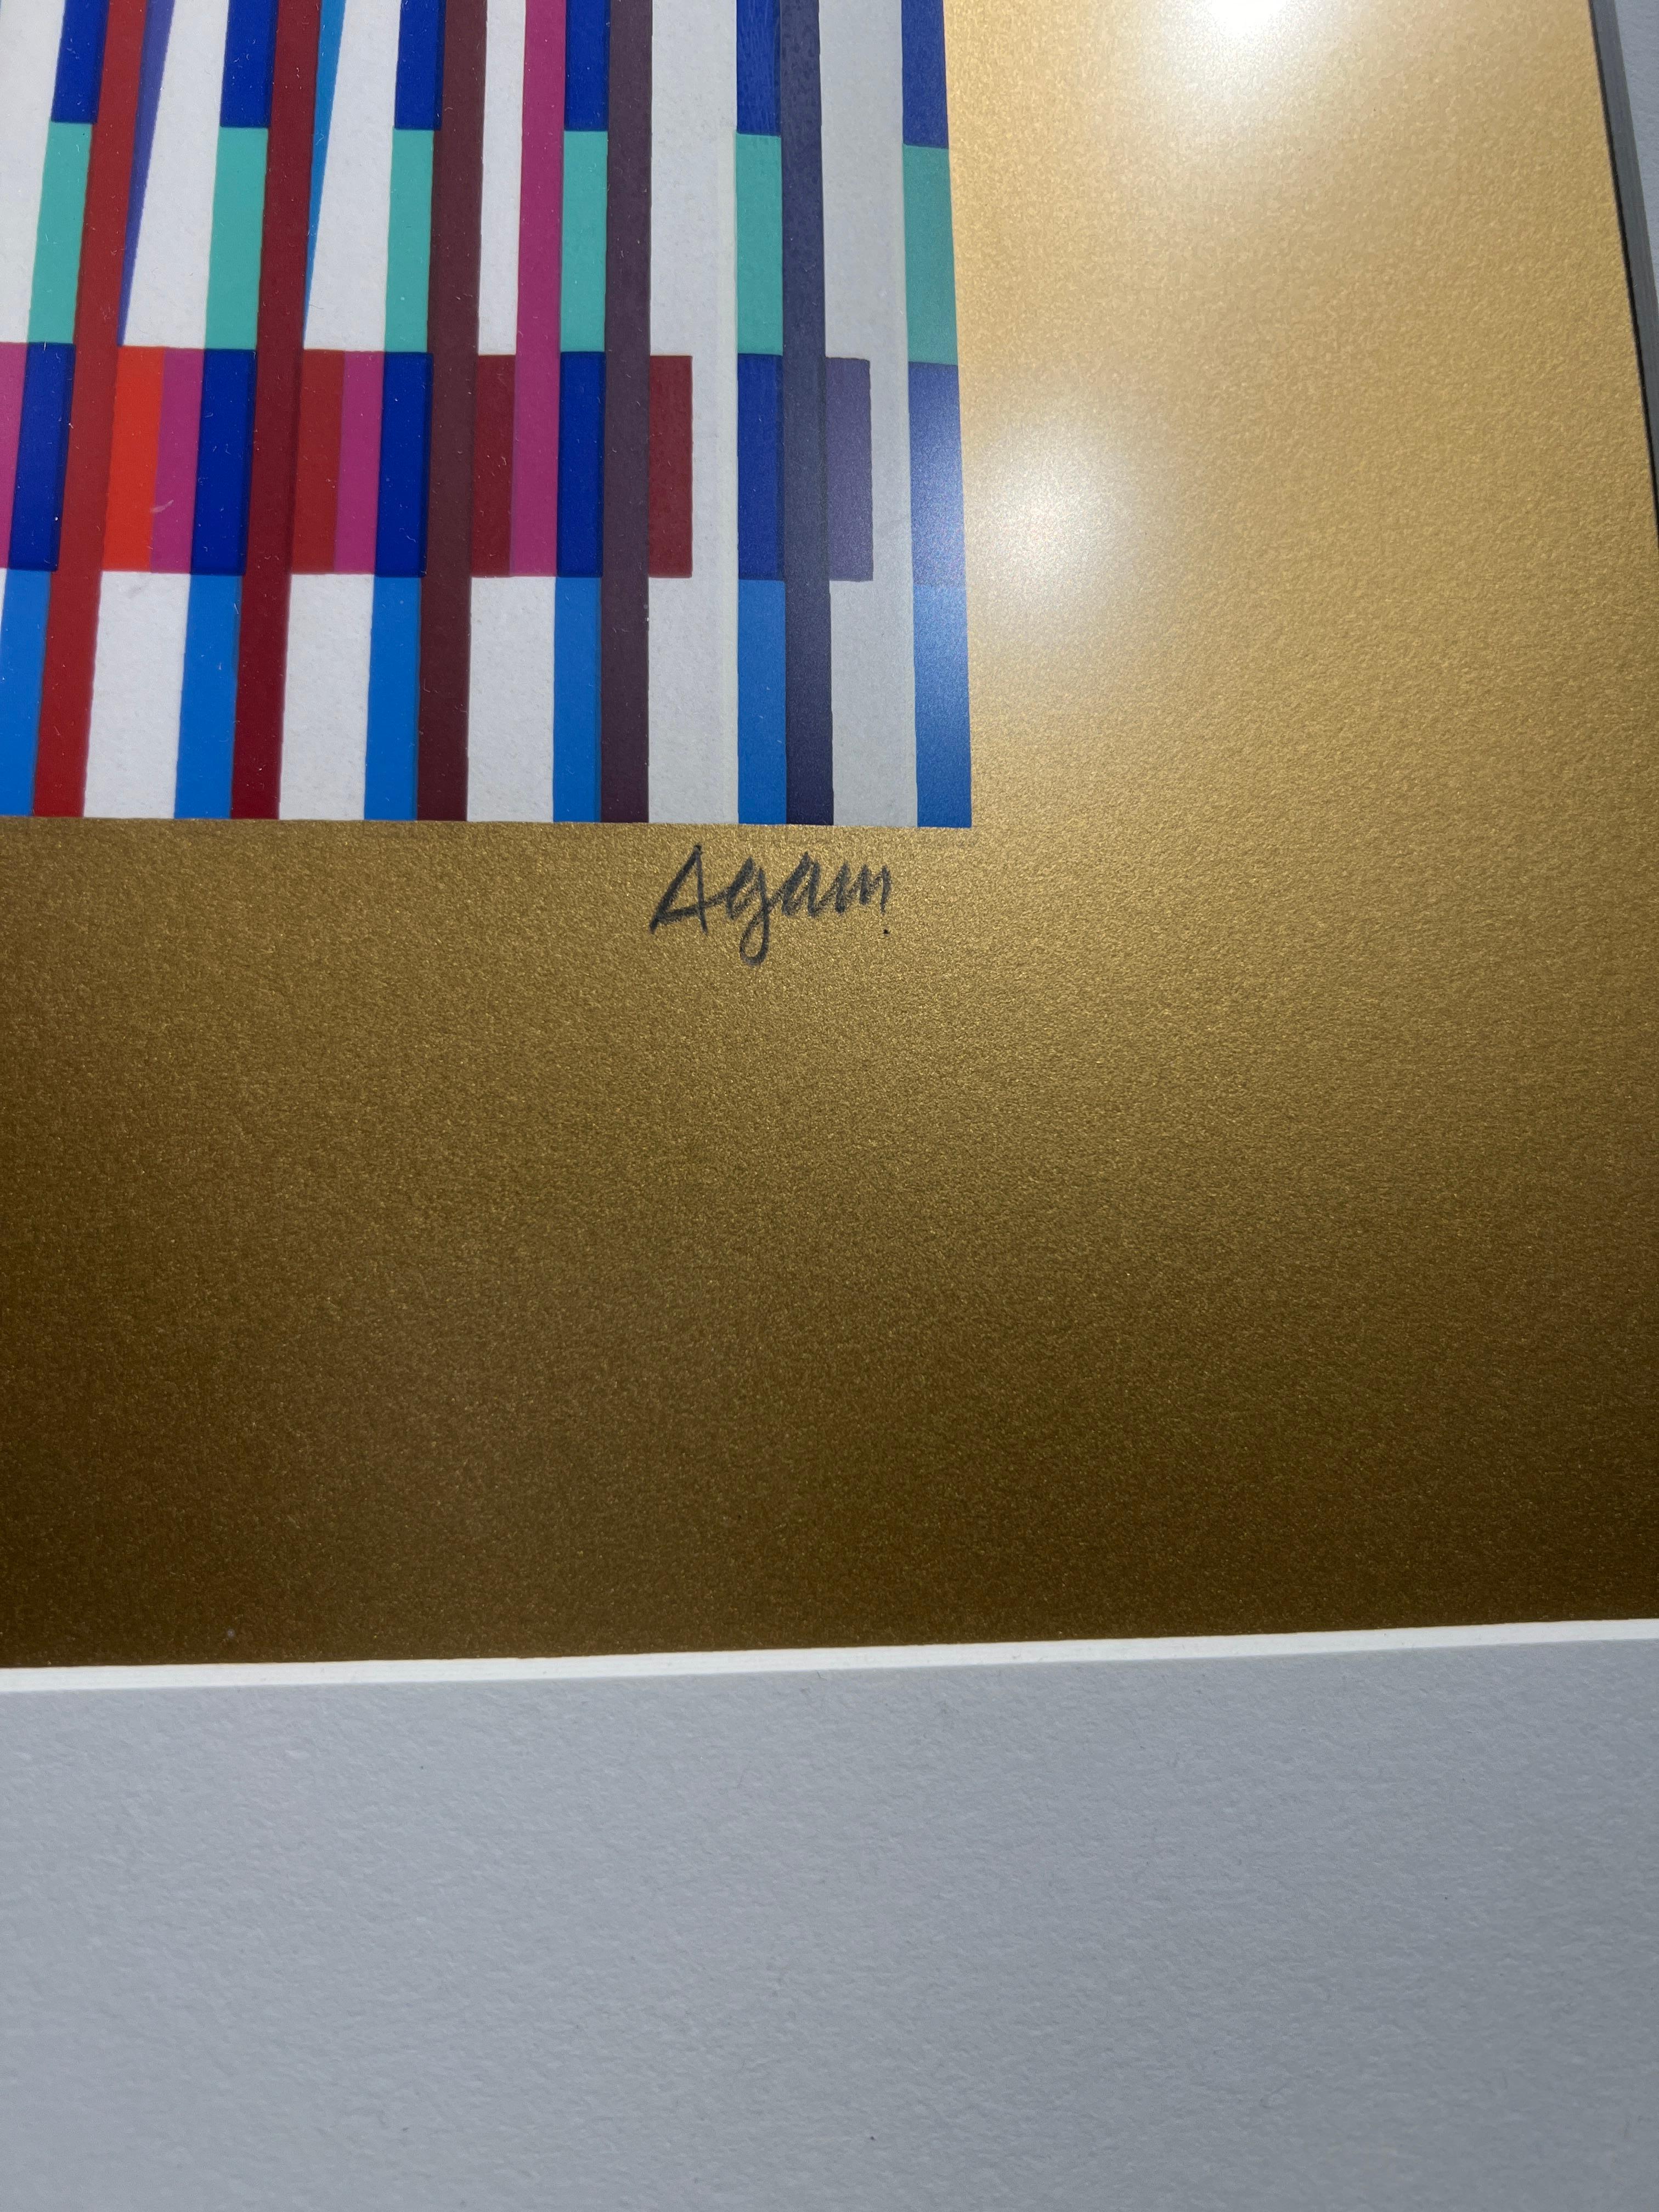 Spectrum 
By. Yaacov Agam (Israeli, b. 1928)
Signed Lower Right
Edition 158/180 Lower Left
Unframed: 27